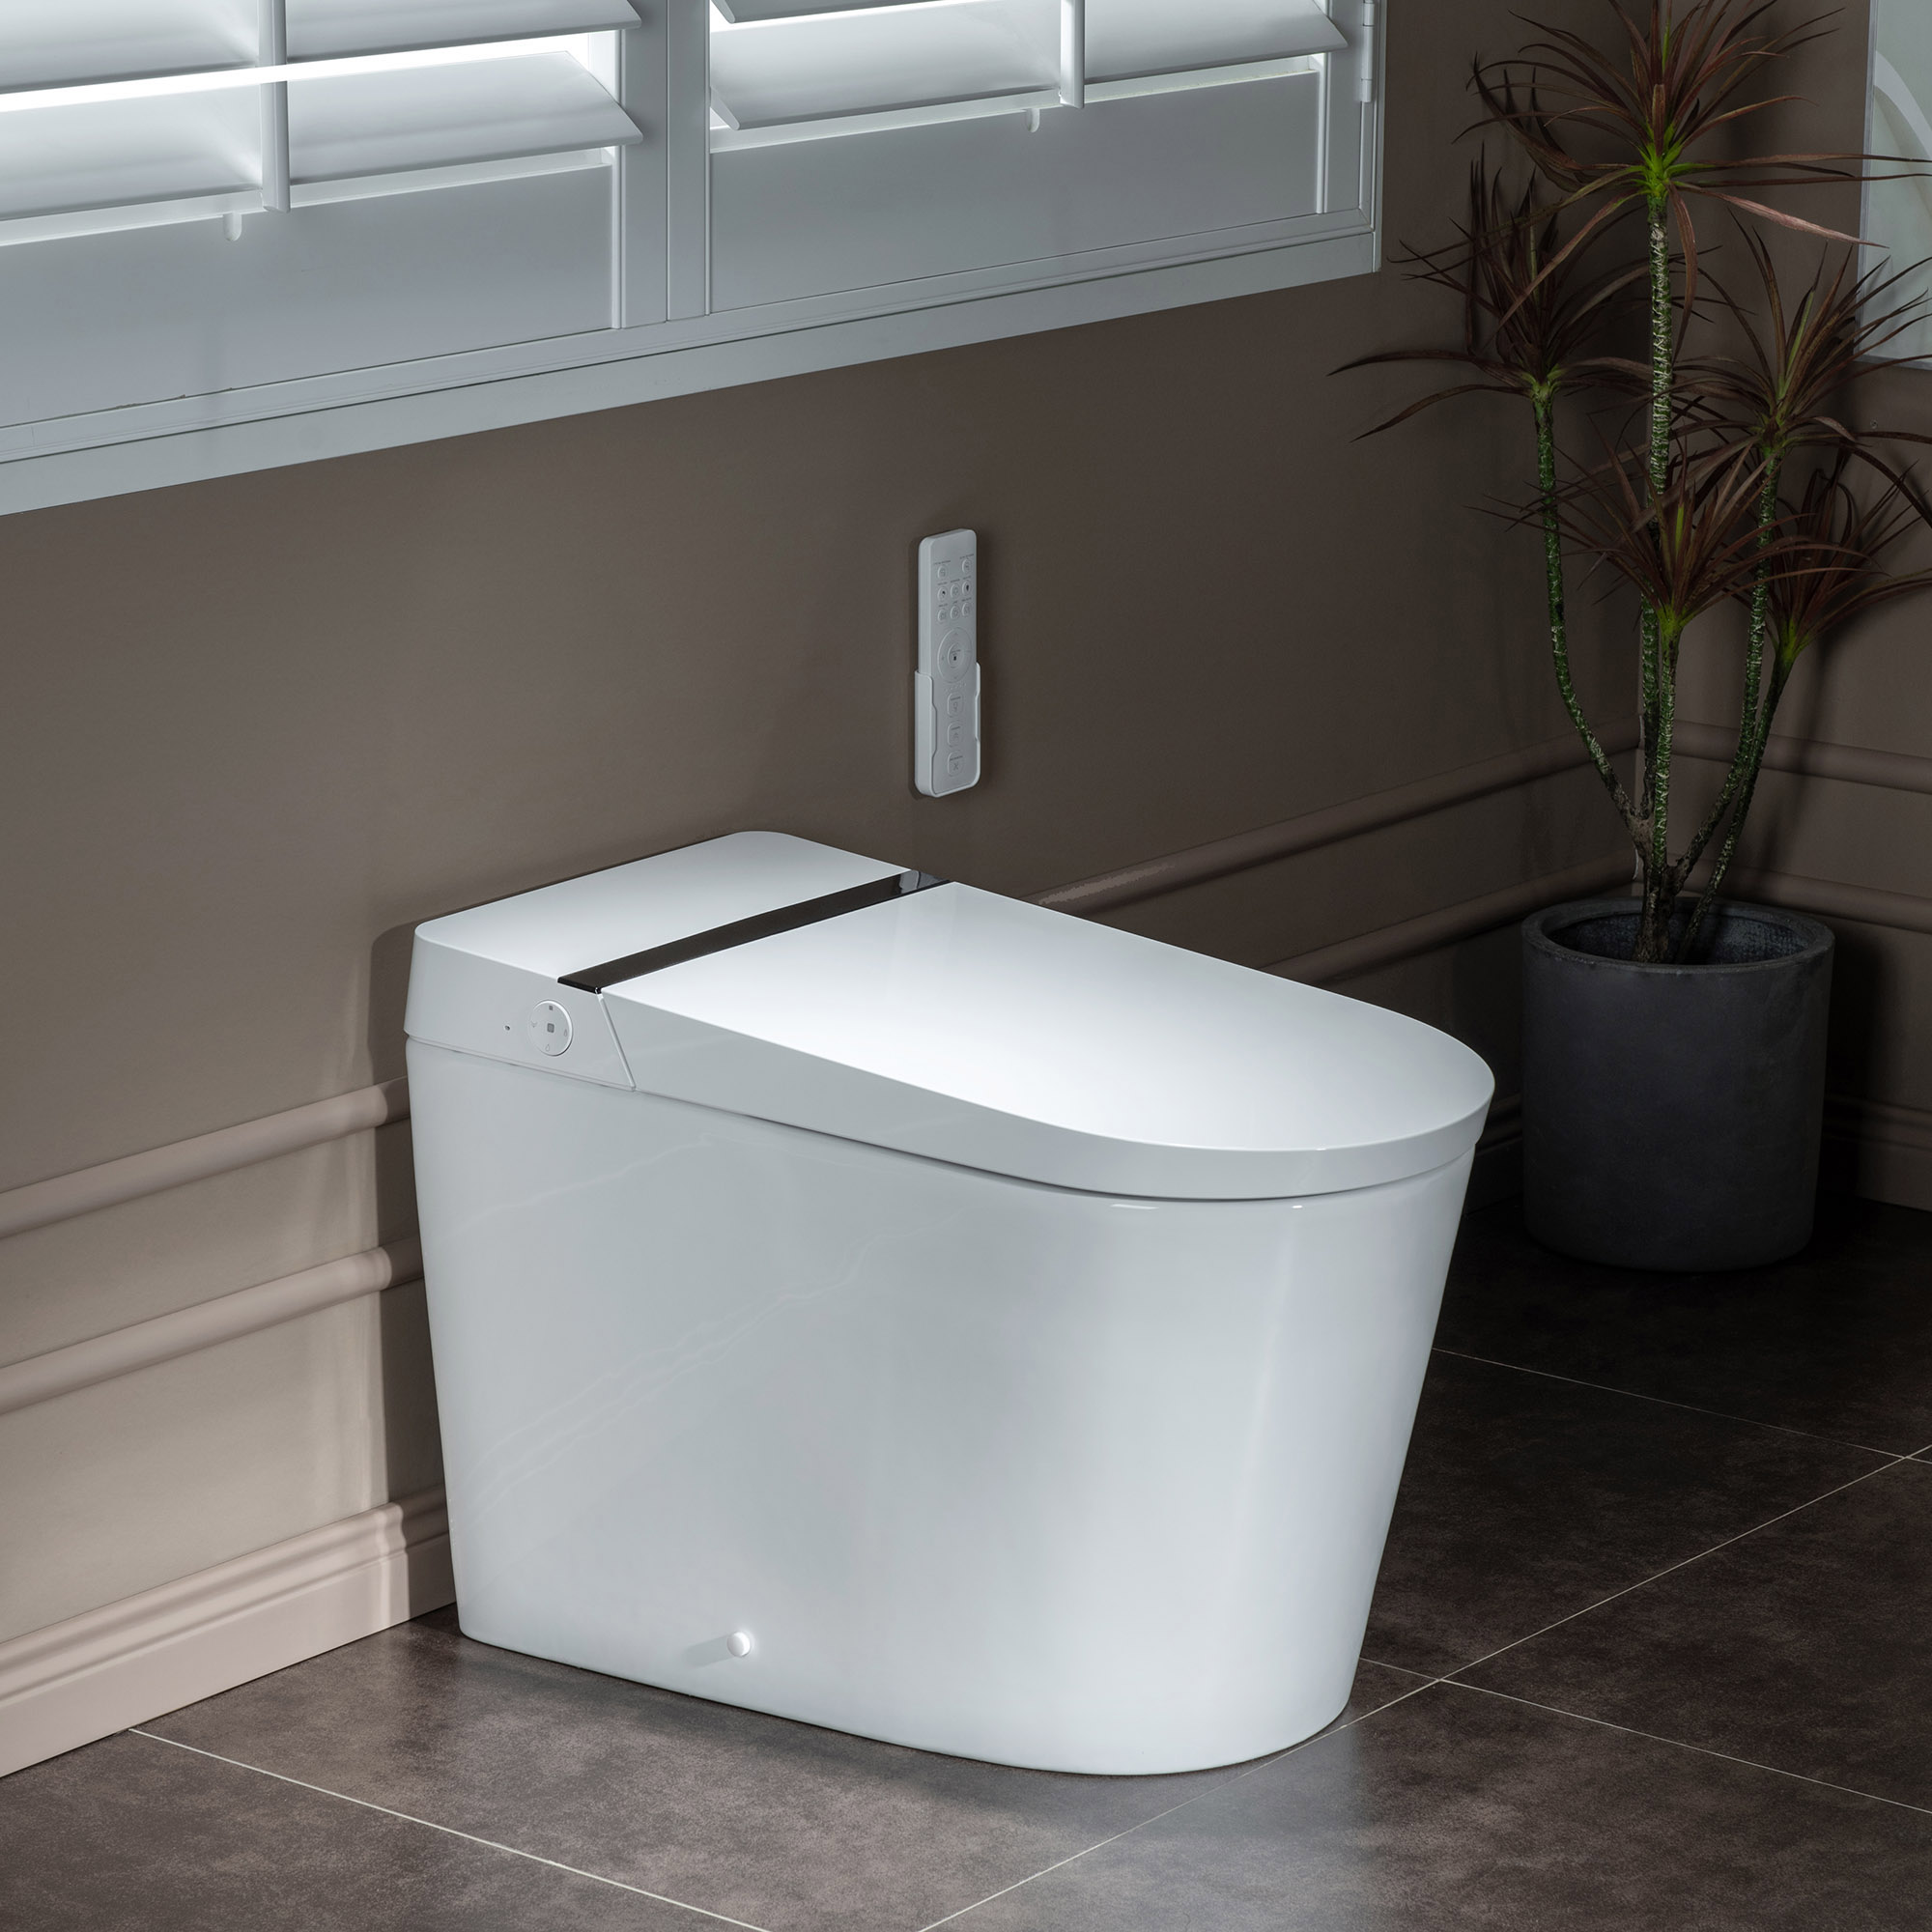  WOODBRIDGE B0990S One Piece Elongated Smart Toilet Bidet with Massage Washing, Auto Open and Close Seat and Lid, Auto Flush, Heated Seat and Integrated Multi Function Remote Control, White_2111